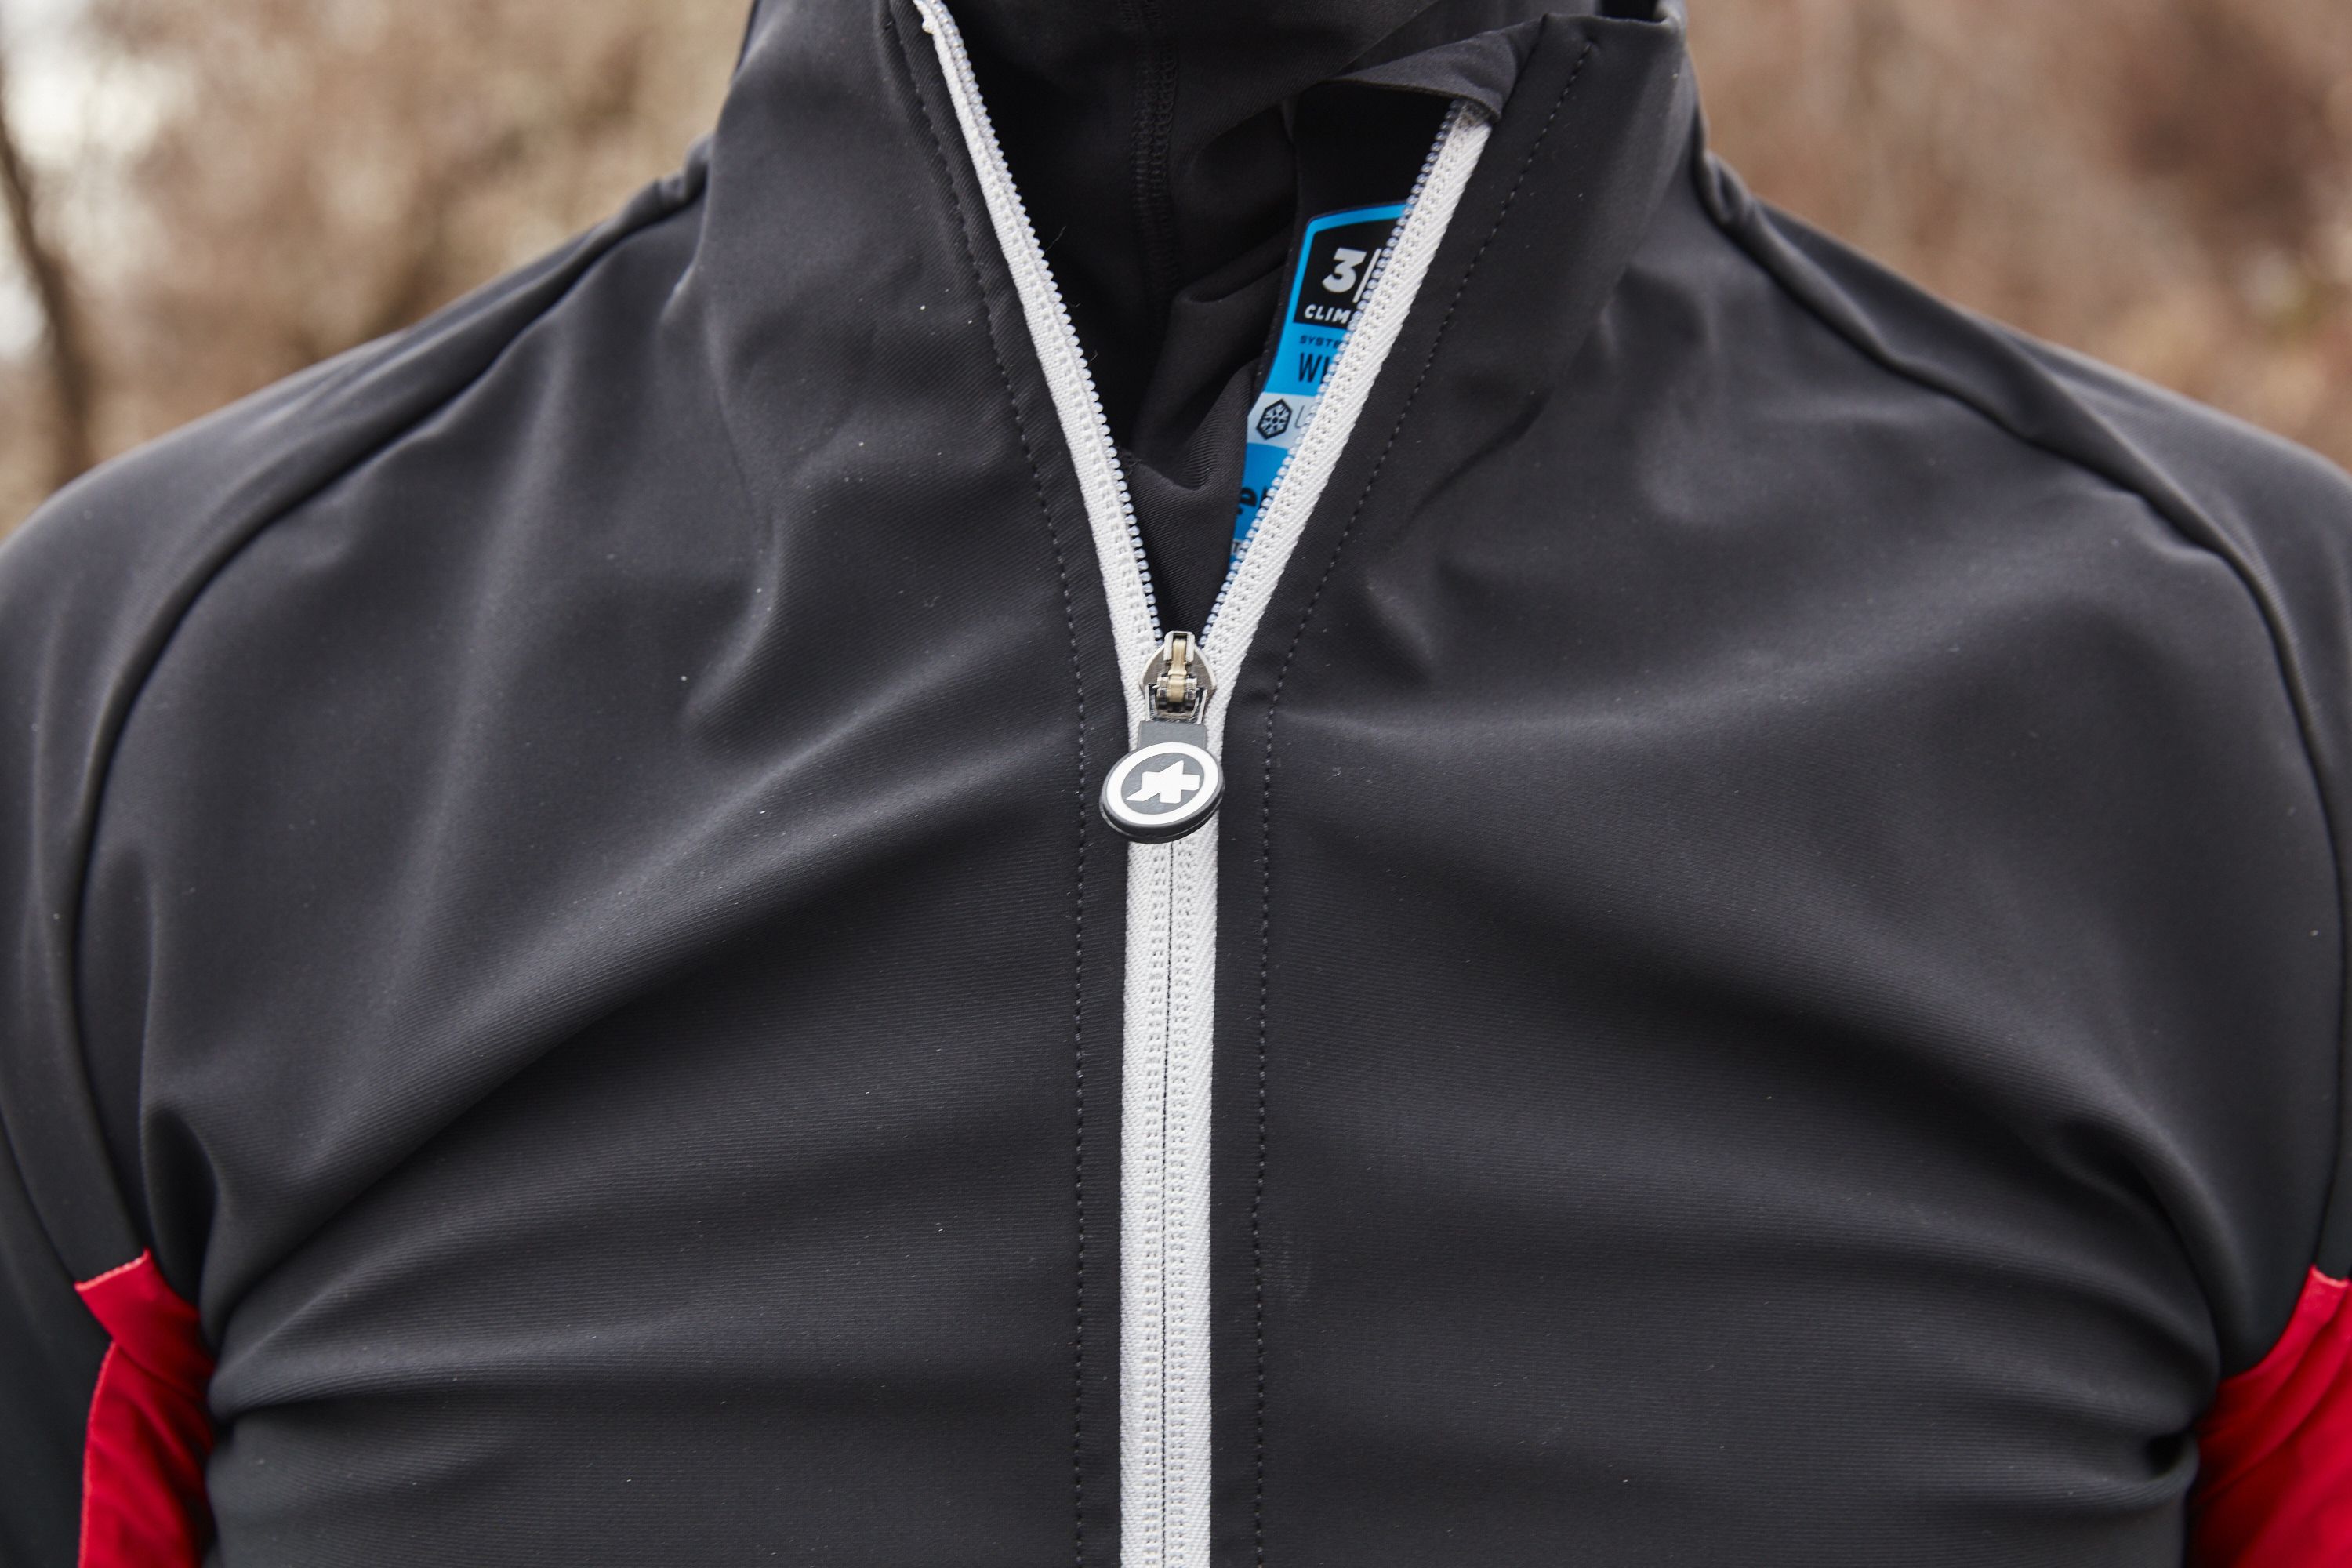 Assos Mille GT ULTRAZ Thermal Jacket Review - Best Winter Cycling